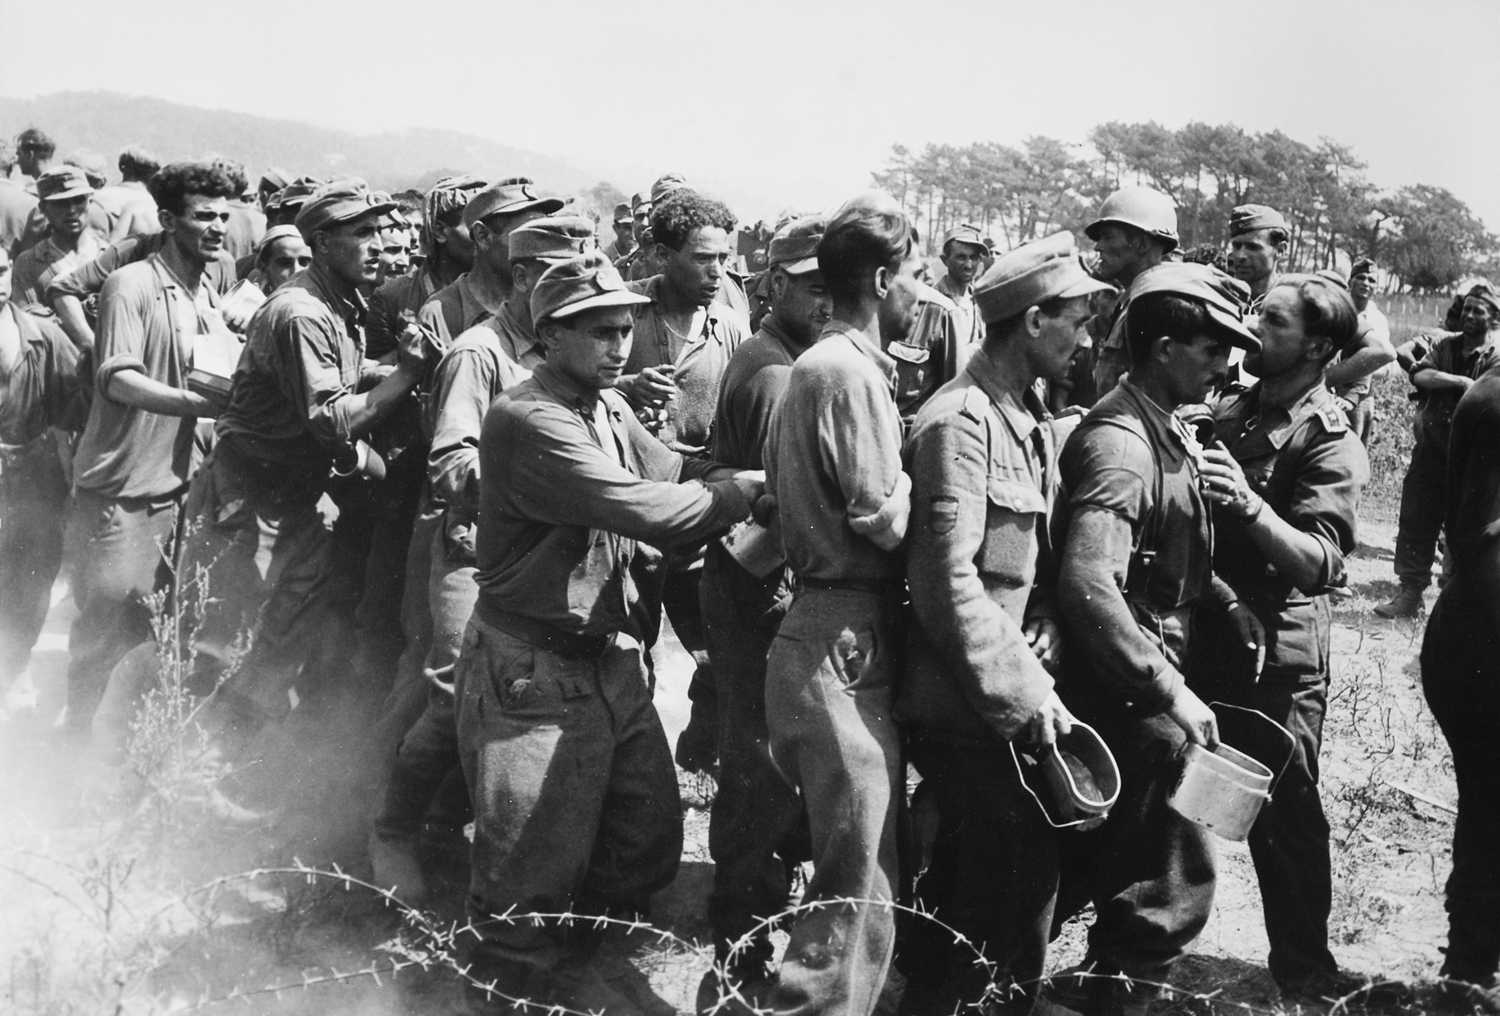 POWs, Allied invasion and liberation of southern France, 1944. (Exact date unknown)